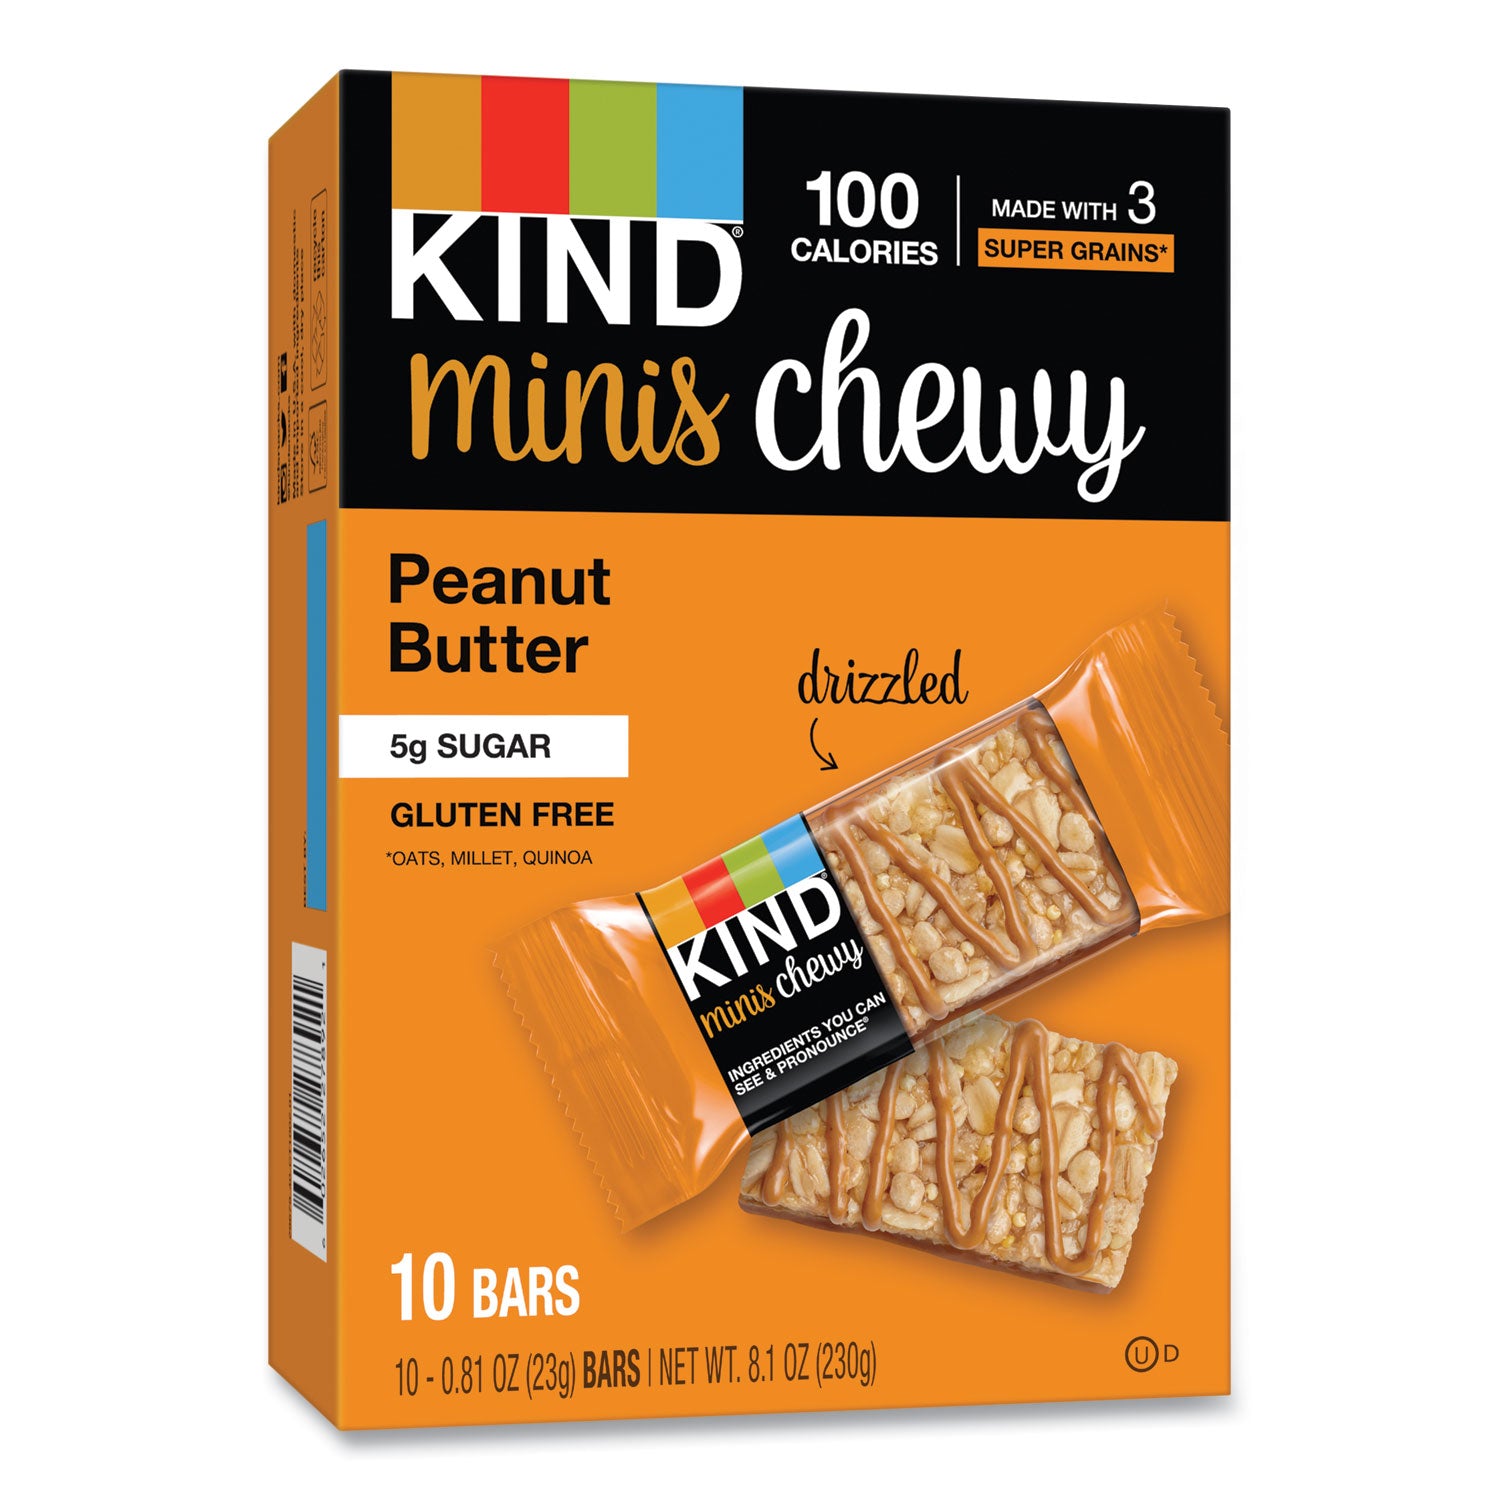 minis-chewy-peanut-butter-081-oz-10-pack_knd27895 - 5